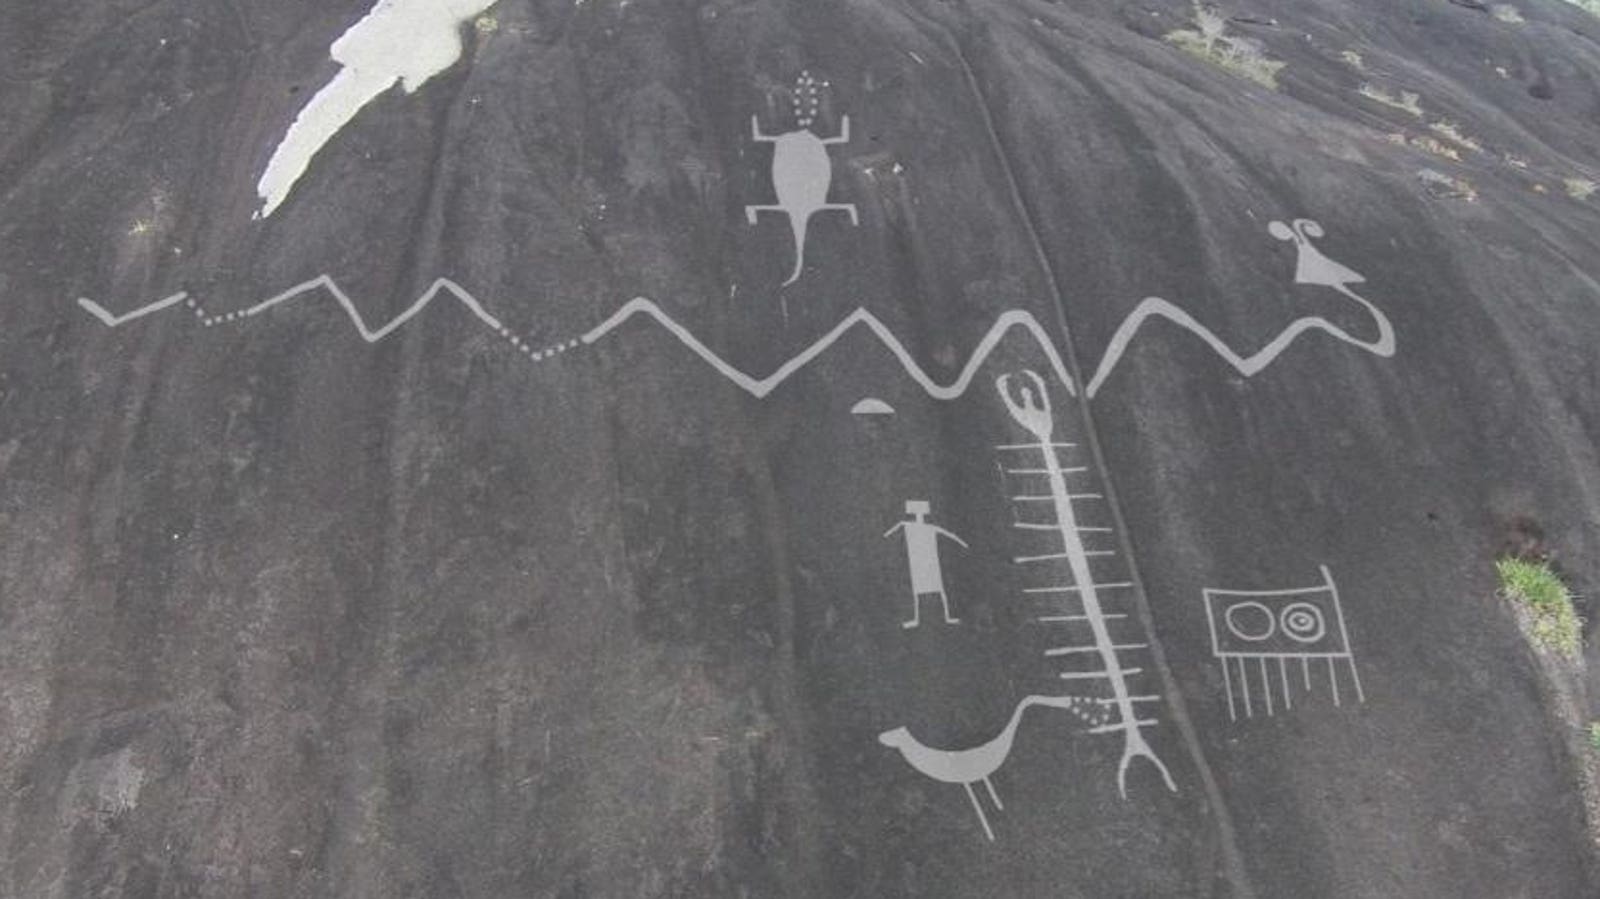 Rock Art Spanning 130 Feet Could Be Largest Prehistoric Drawing Found